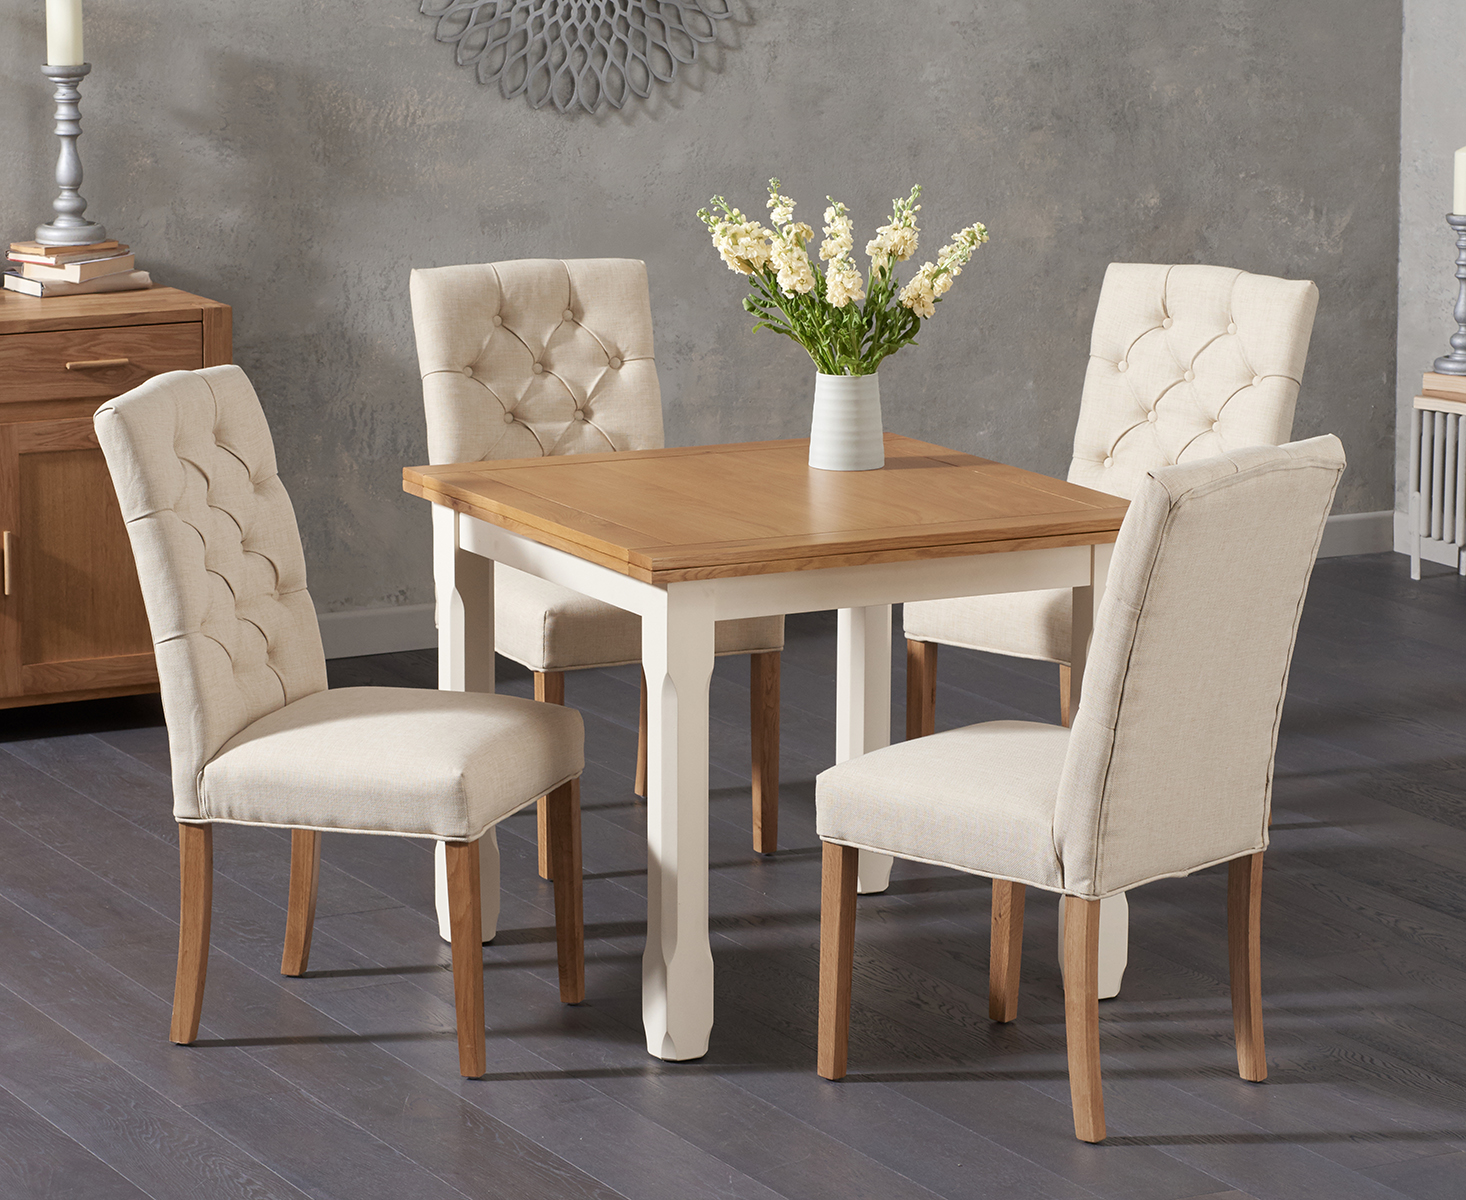 Somerset 90cm Flip Top Oak And Cream Painted Dining Table With 2 Cream Isabella Cream Fabric Chairs